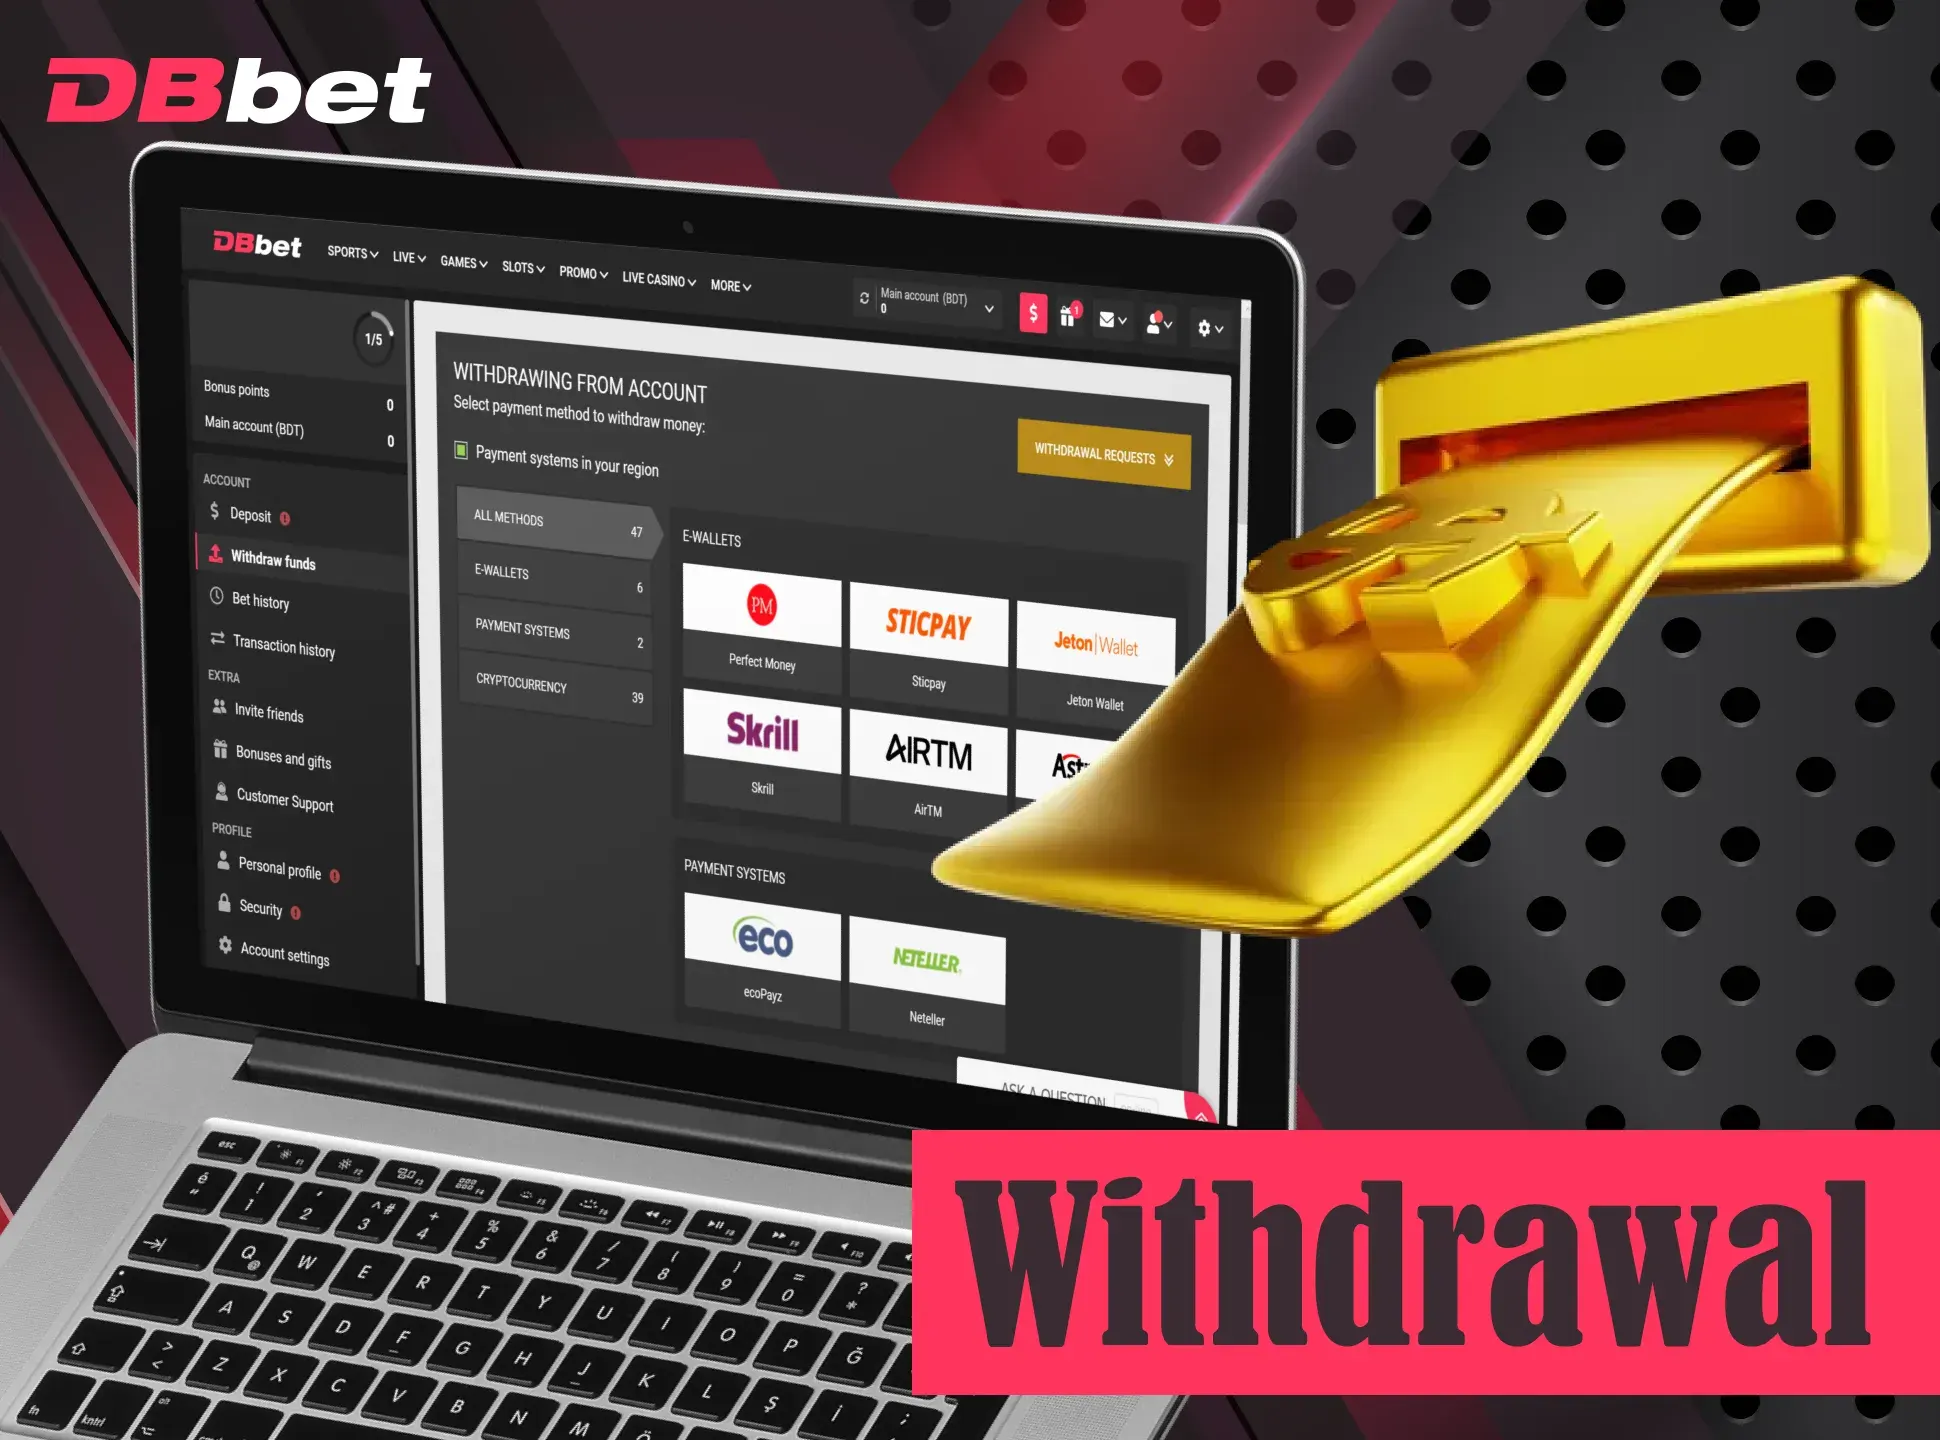 Withdraw money at DBbet without any problems.